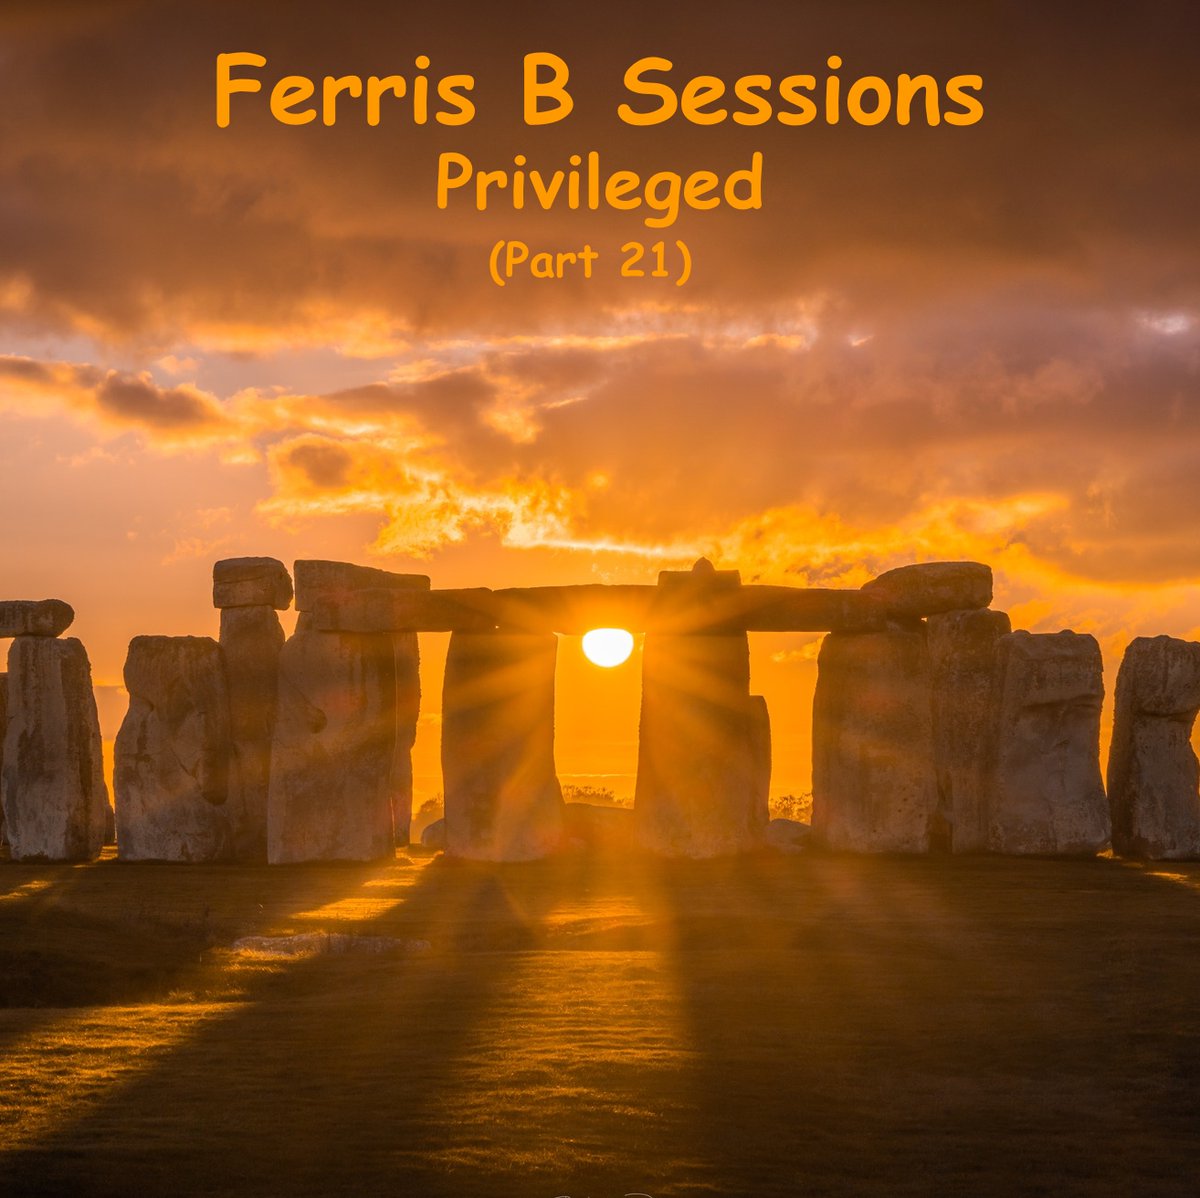 Boom , welcome to 2023 & a new banging & uplifting mix from #FerrisBSessions to go with #Bitcoin #BTC $BTC's latest break up move.

#Trance #EuphoricTrance #HardTrance #TechTrance 

house-mixes.com/profile/Ferris…